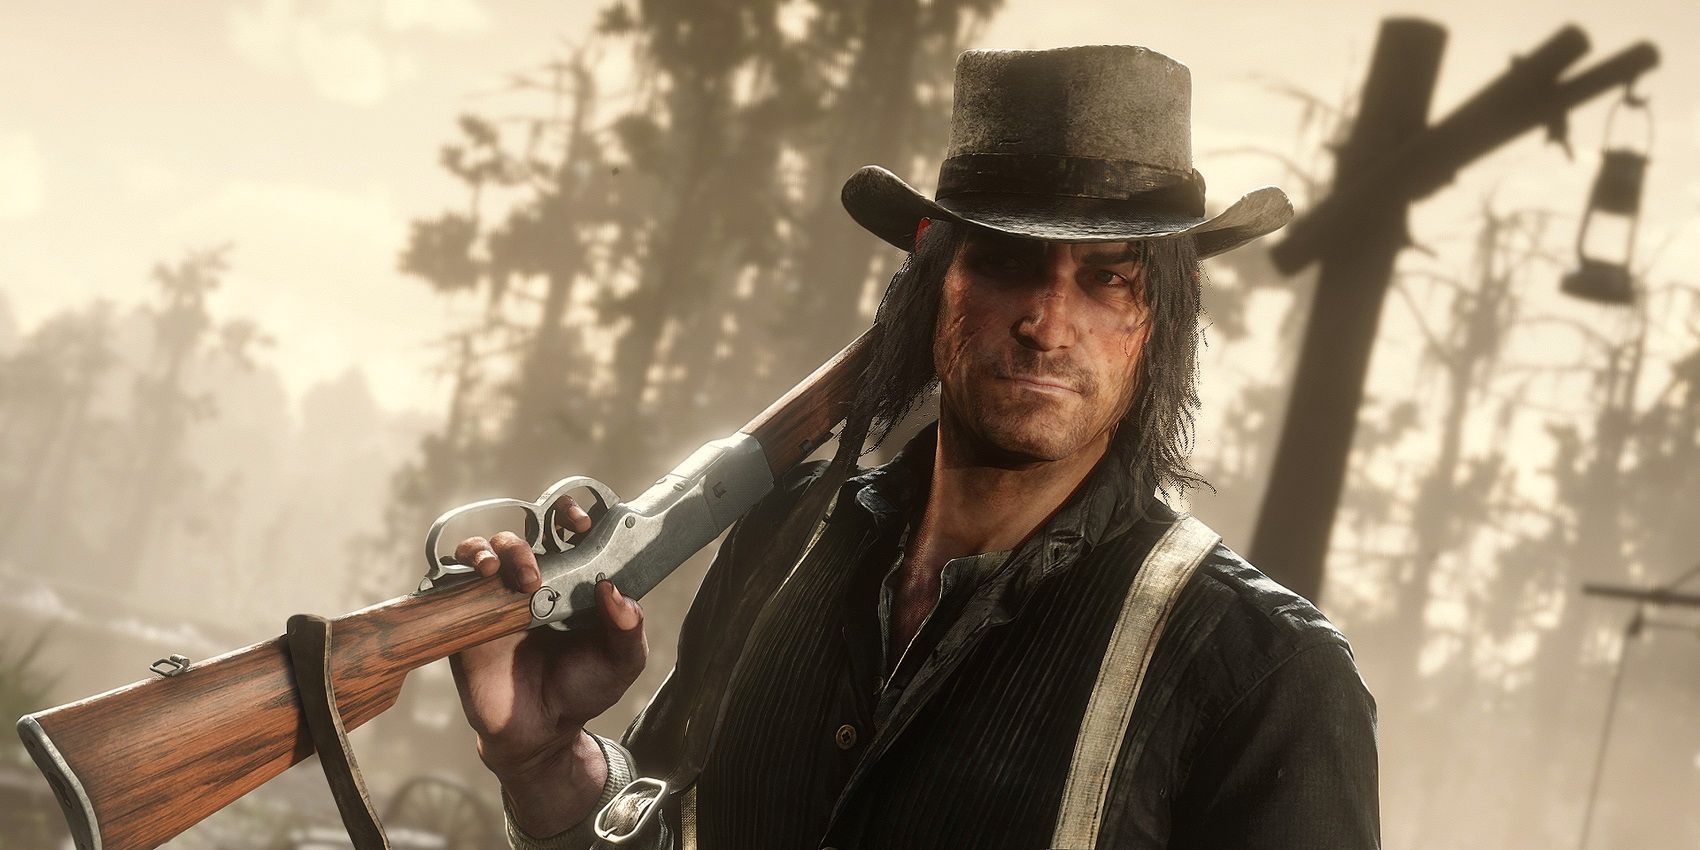 John Marston repeats an iconic line in RDR2